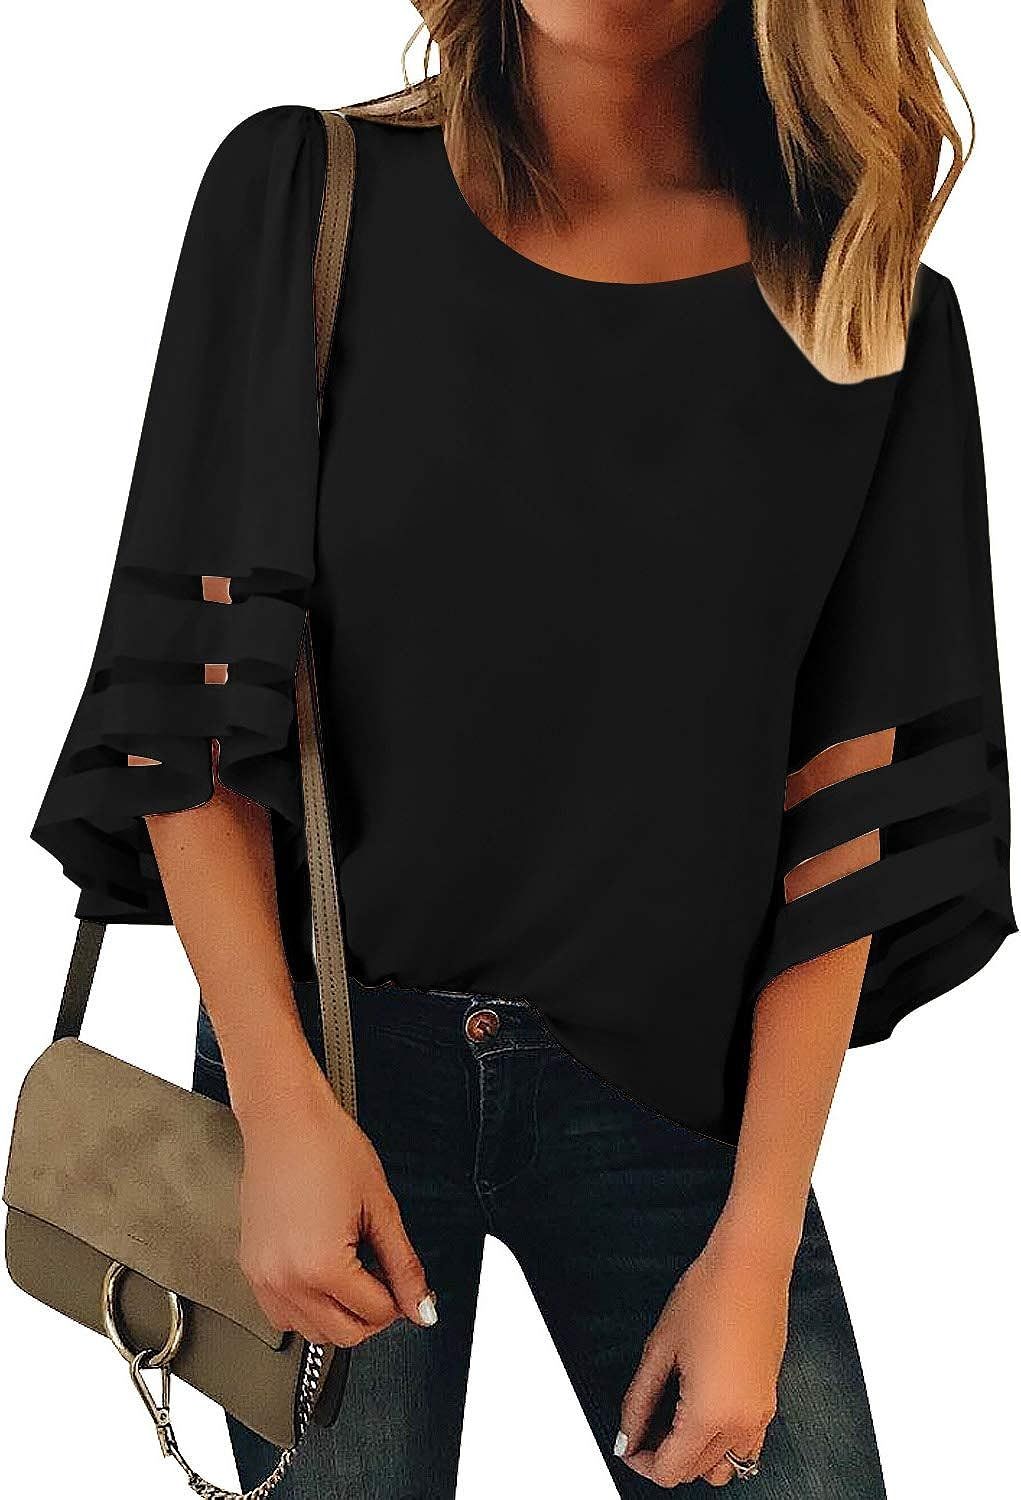 GRAPENT Women's Casual 3/4 Bell Sleeve Blouse V Neck Mesh Panel Loose Top Shirt | Amazon (US)